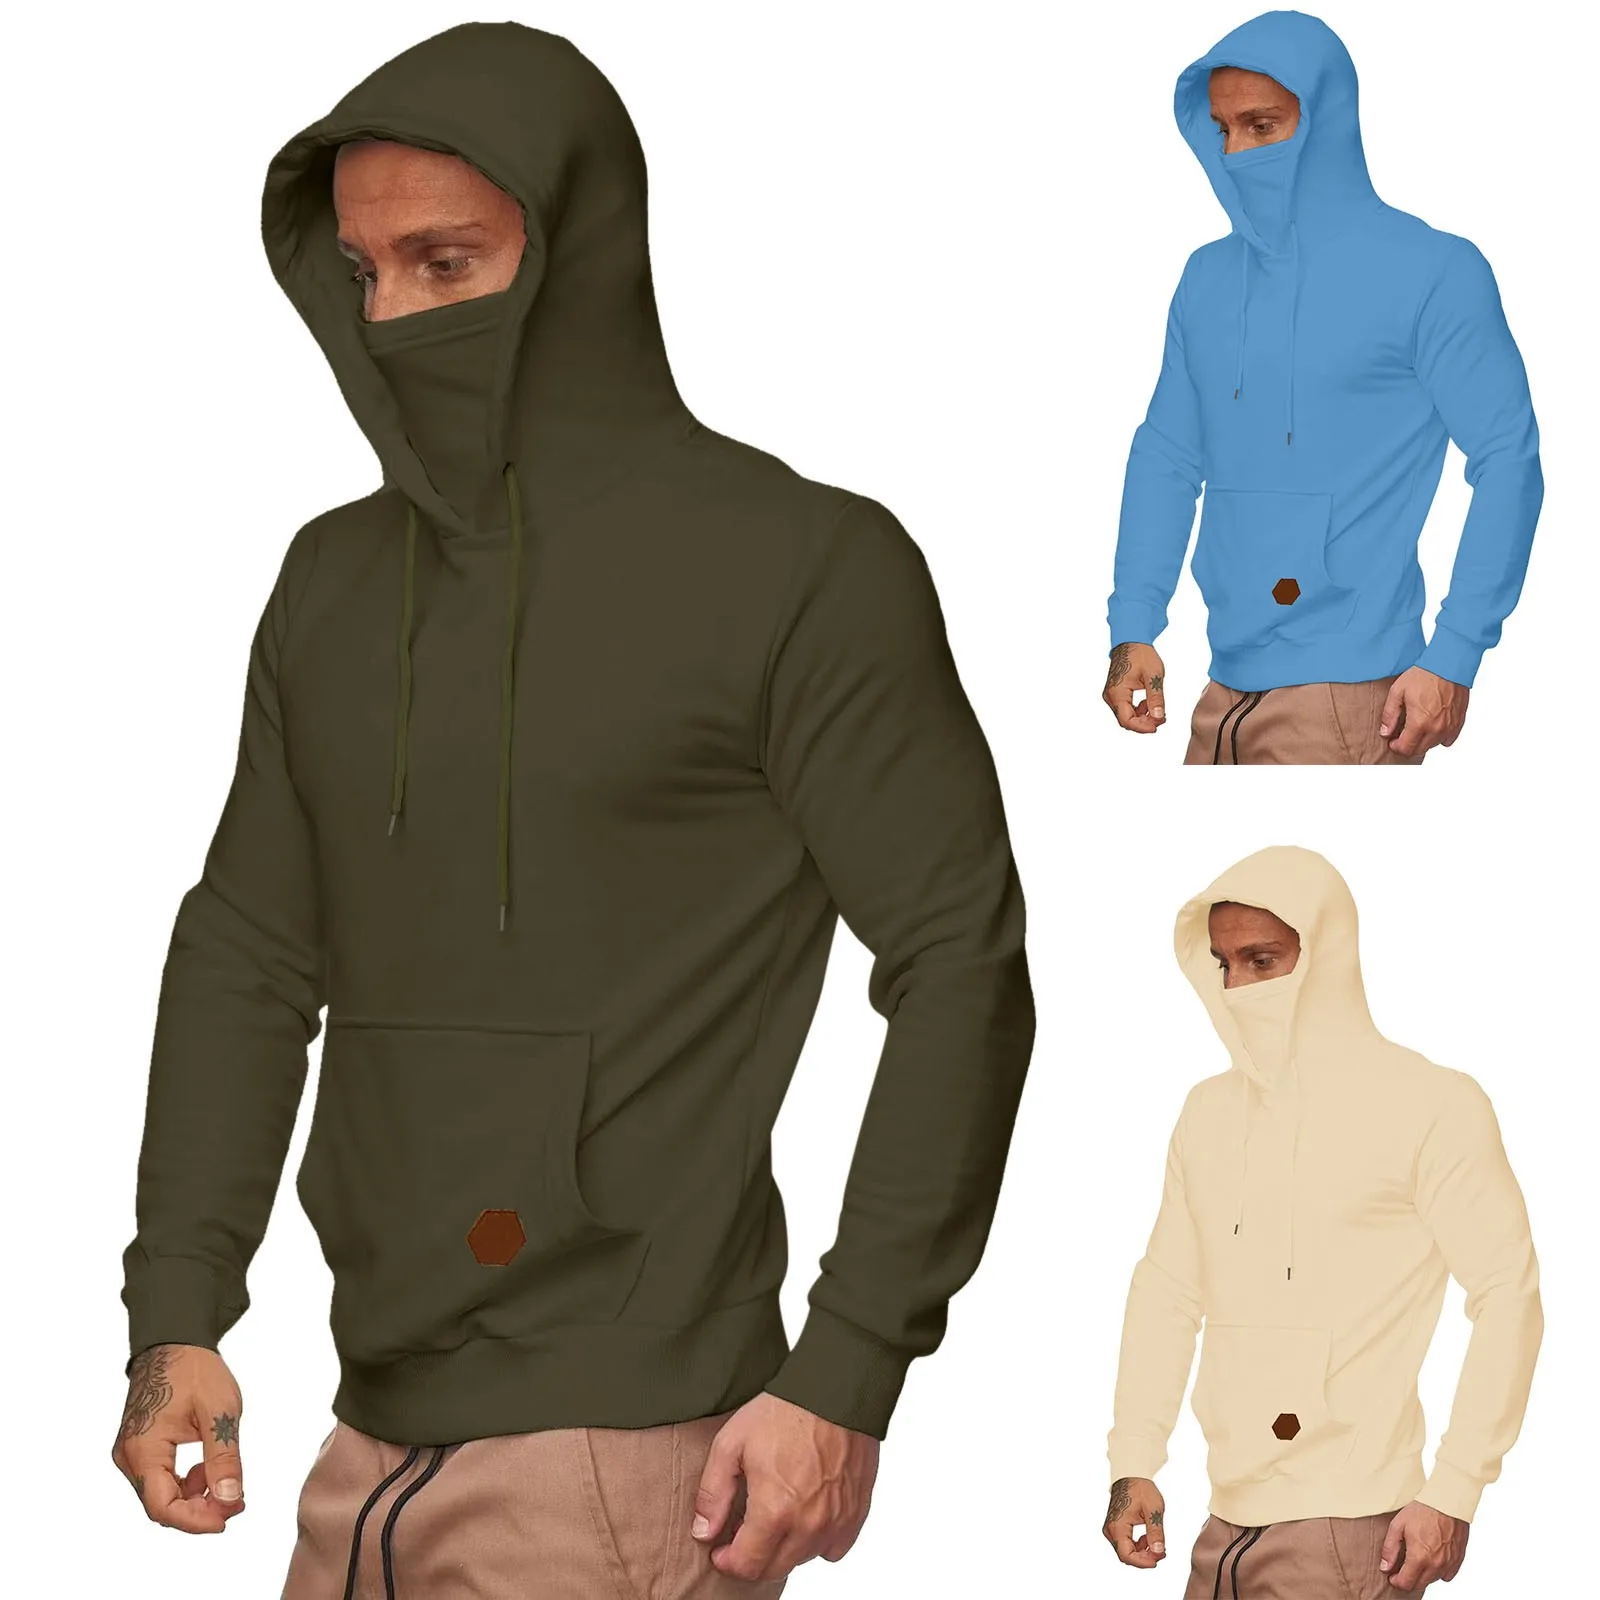 

Mens Gym Hoodie Long Sleeve with Mask Sweatshirt Hoodies Casual Splice Large Open-Forked Male Clothing Mask Button Sports Hooded